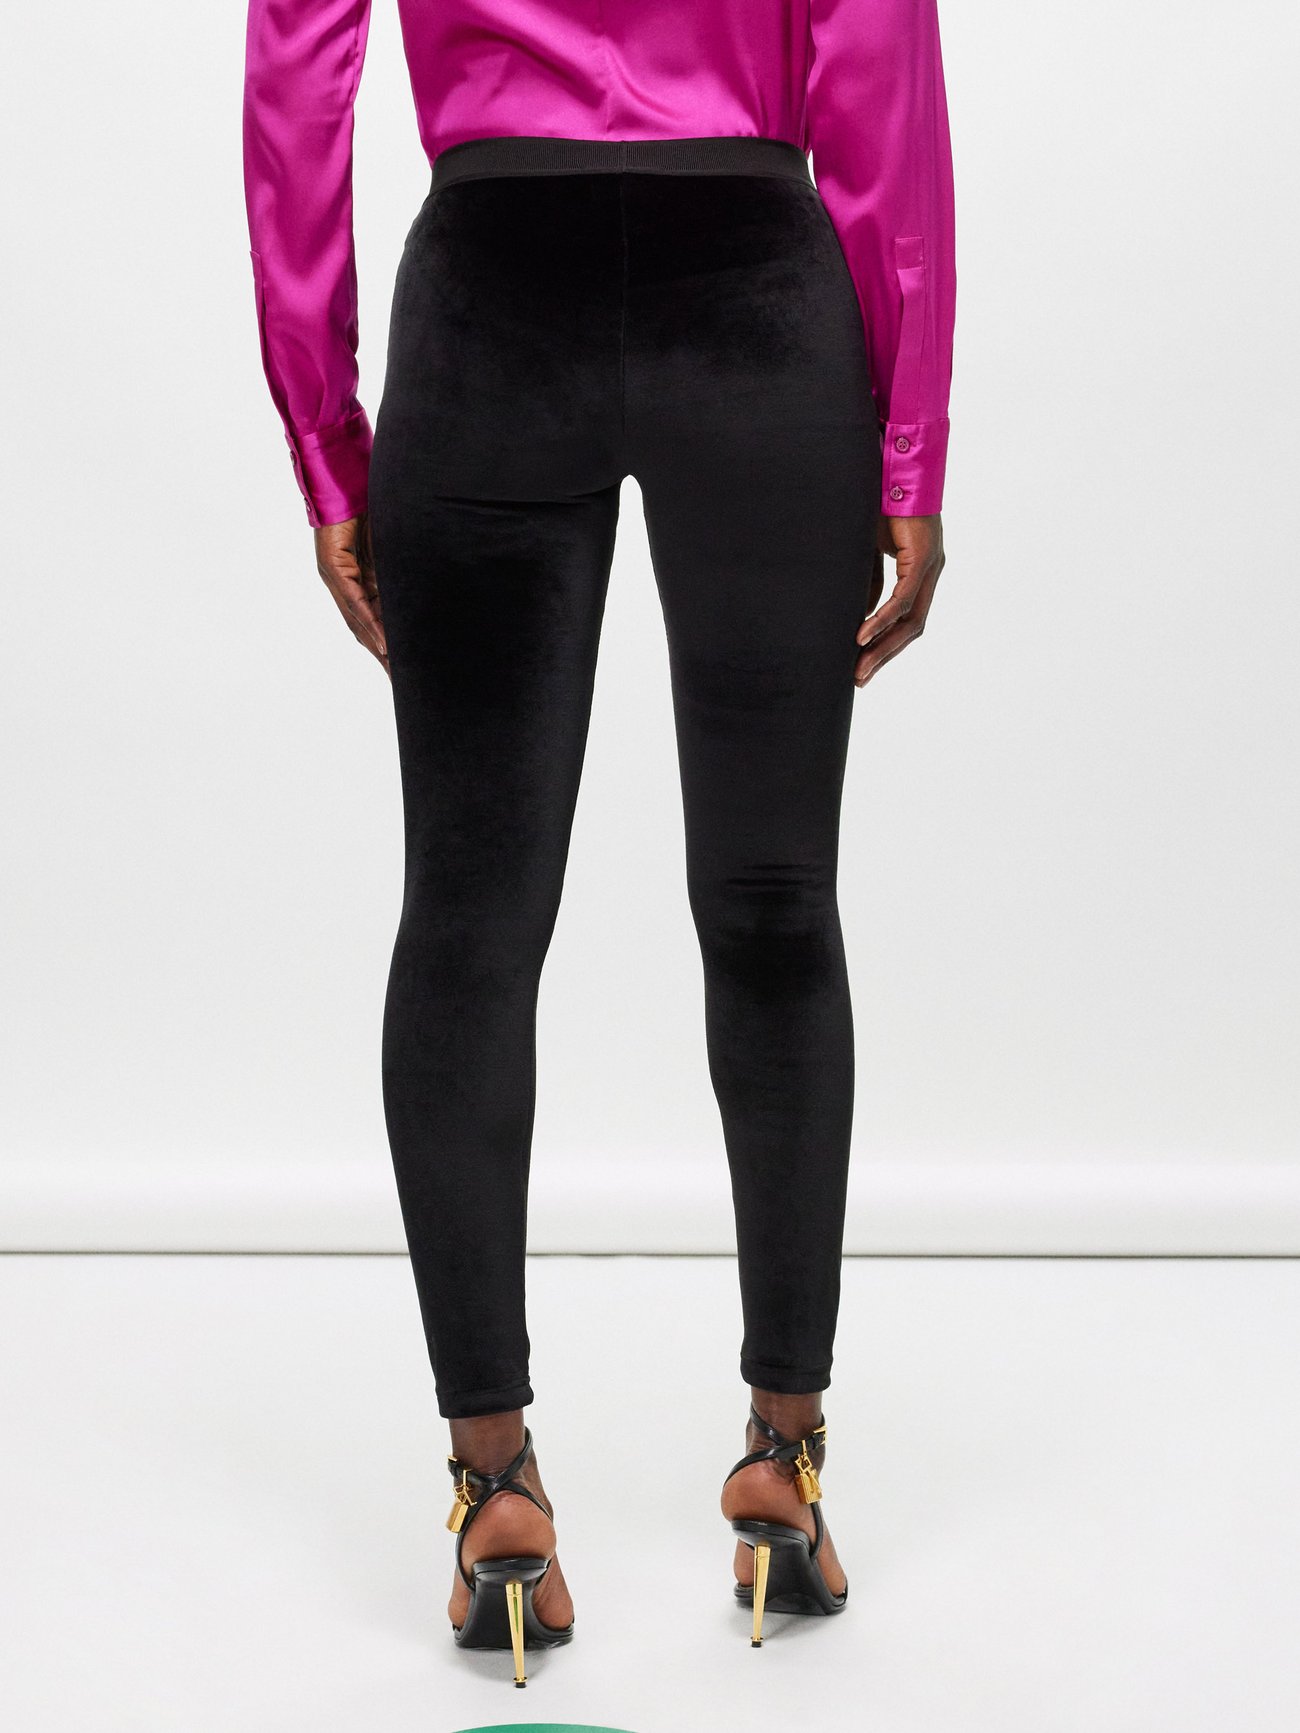 Score these Tom ford leggings for $157! Link in bio